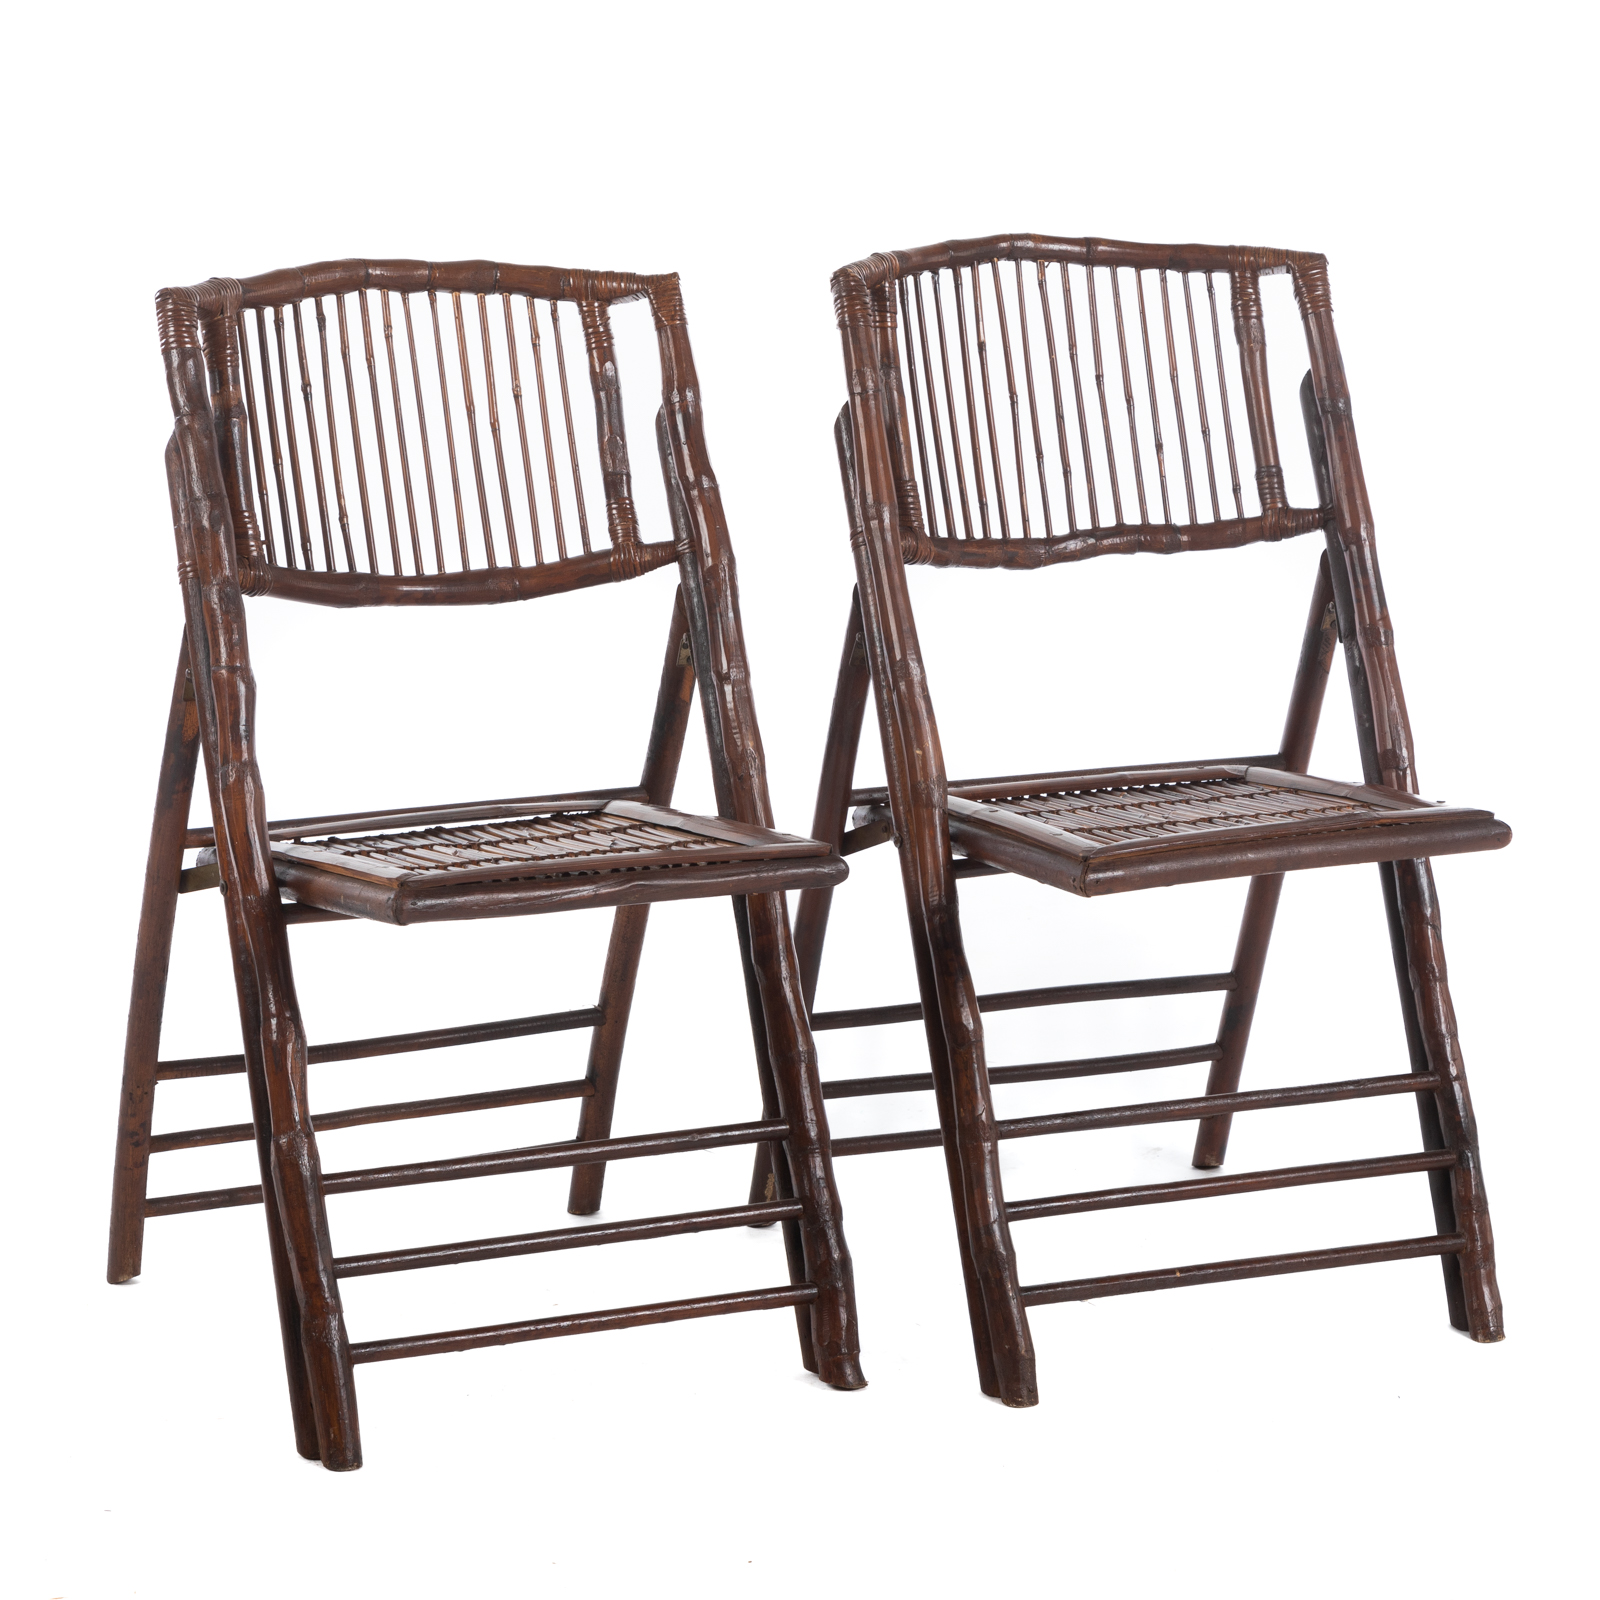 A PAIR OF FOLDING RATTAN CHAIRS With